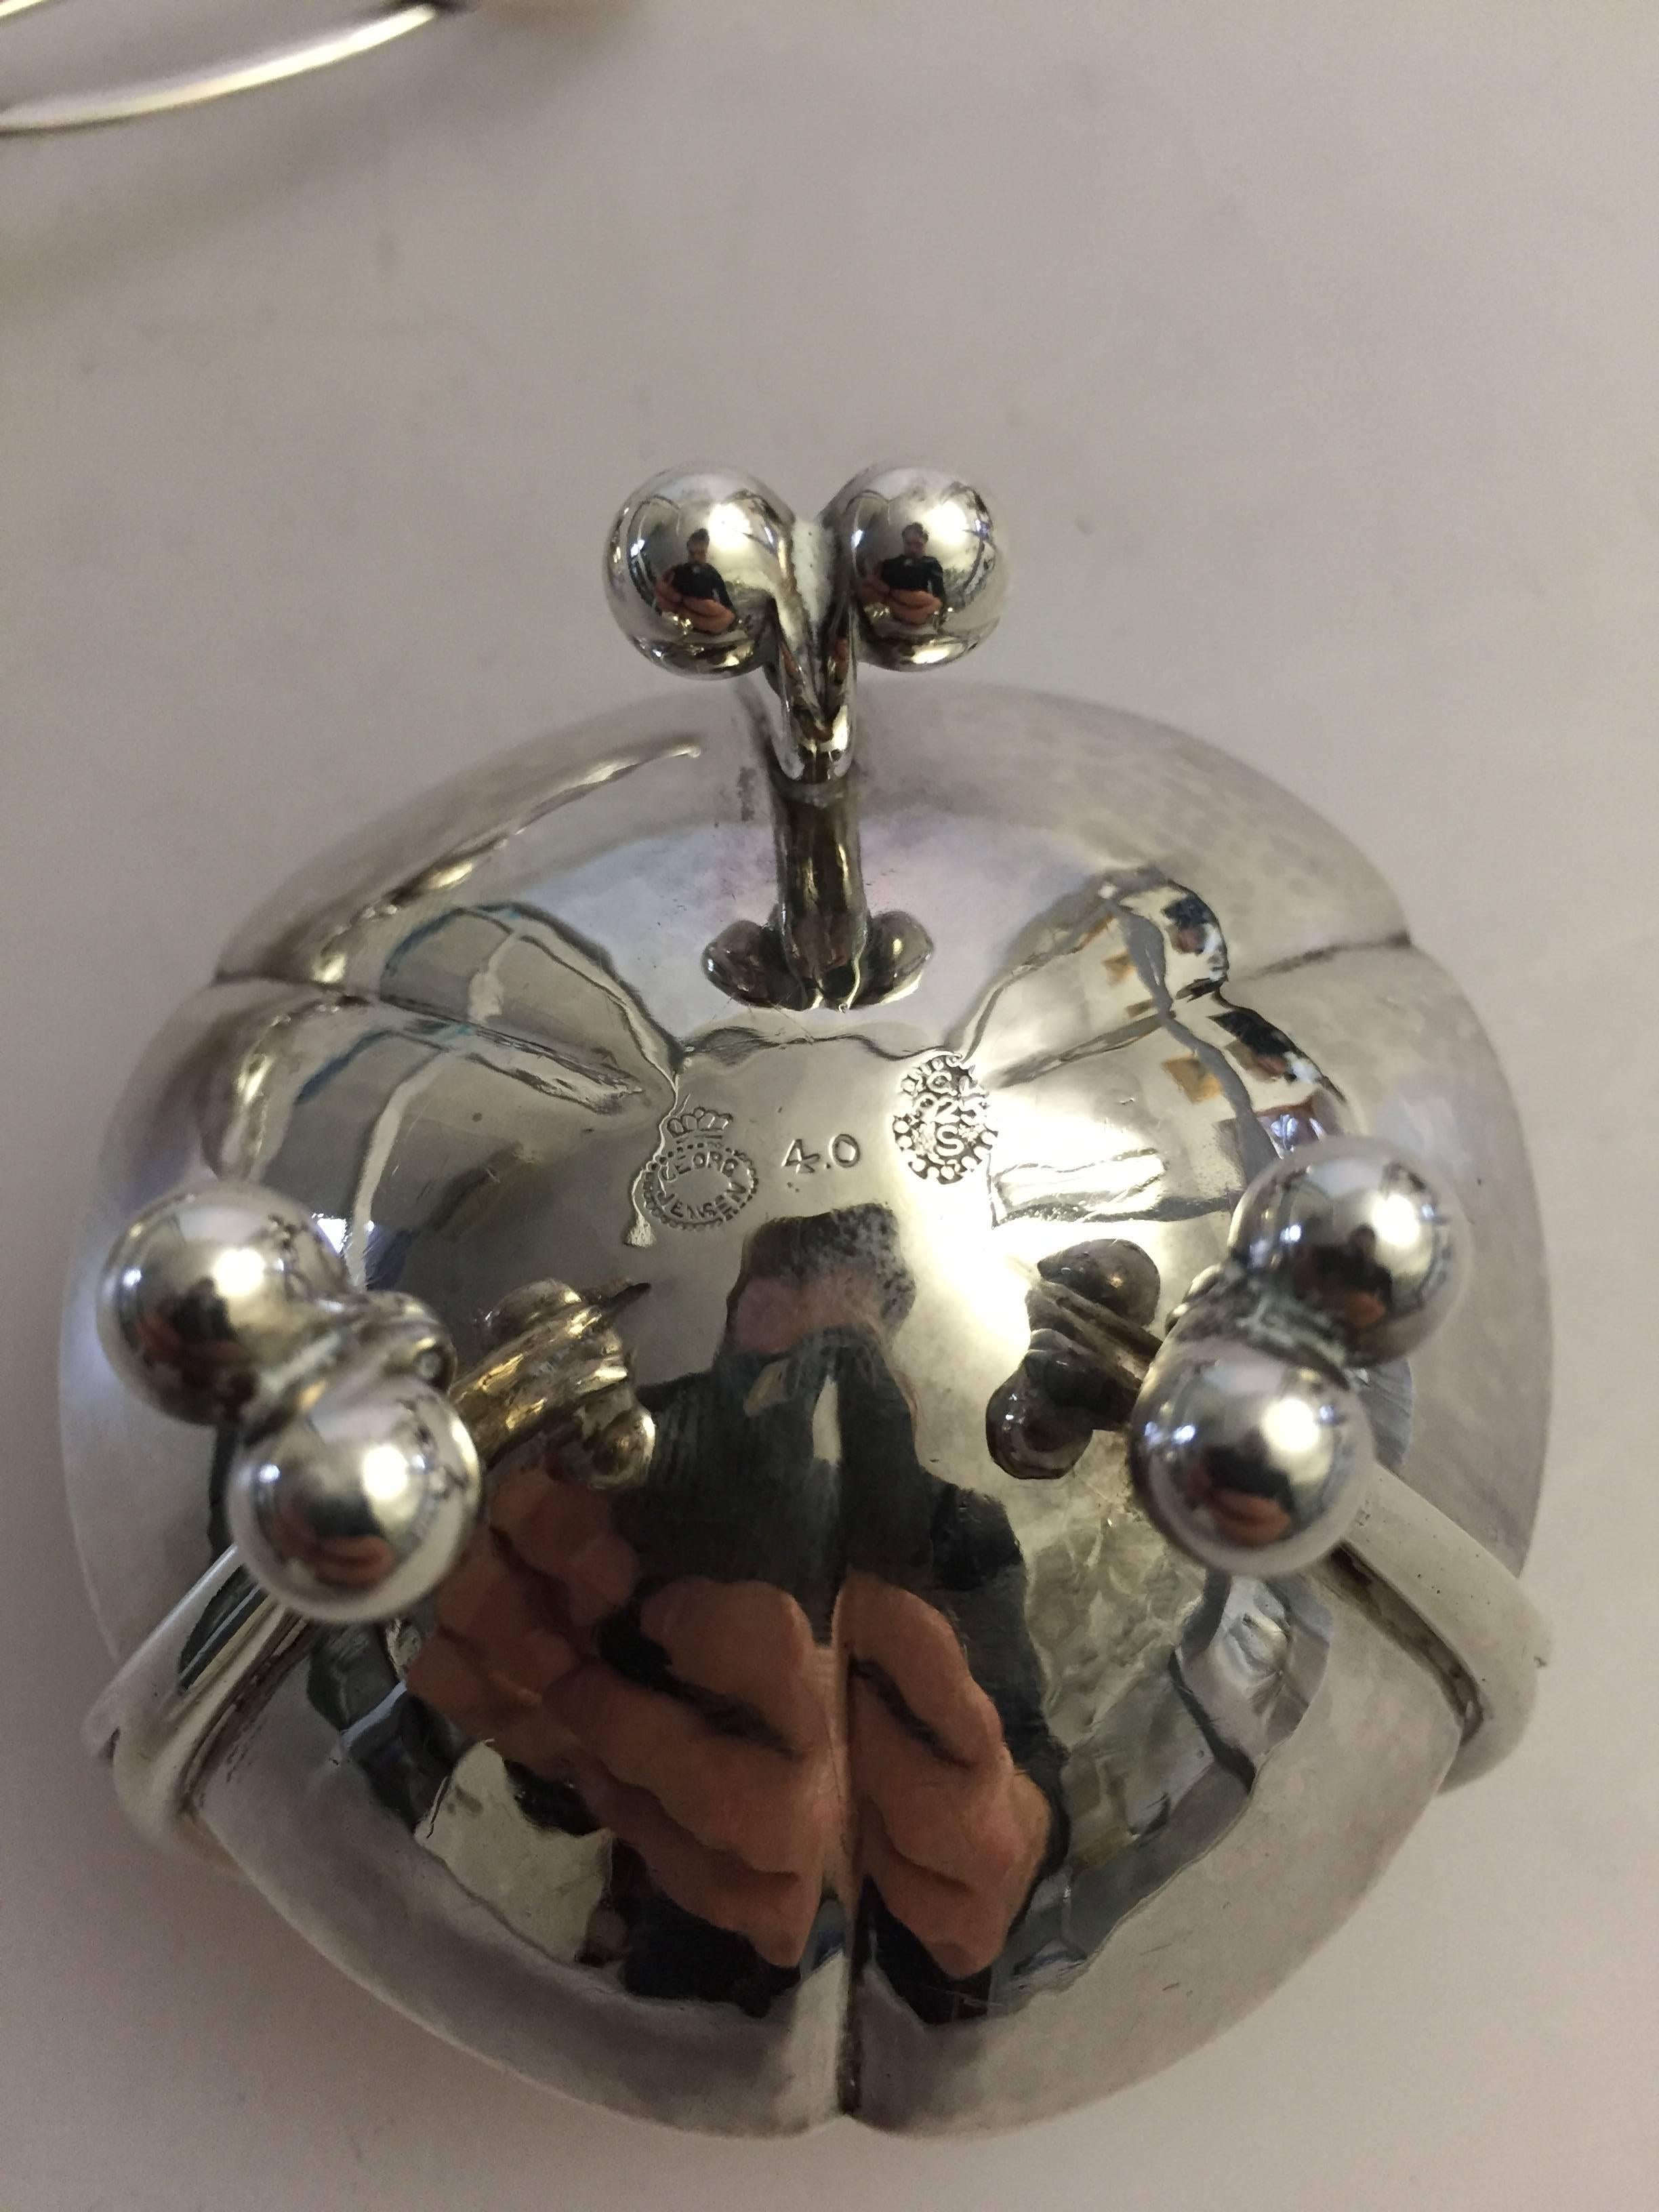 Georg Jensen sterling silver blossom teastrainer and holder #40. With marks from 1925-1982.

Strainer measures 14.5 cm L.